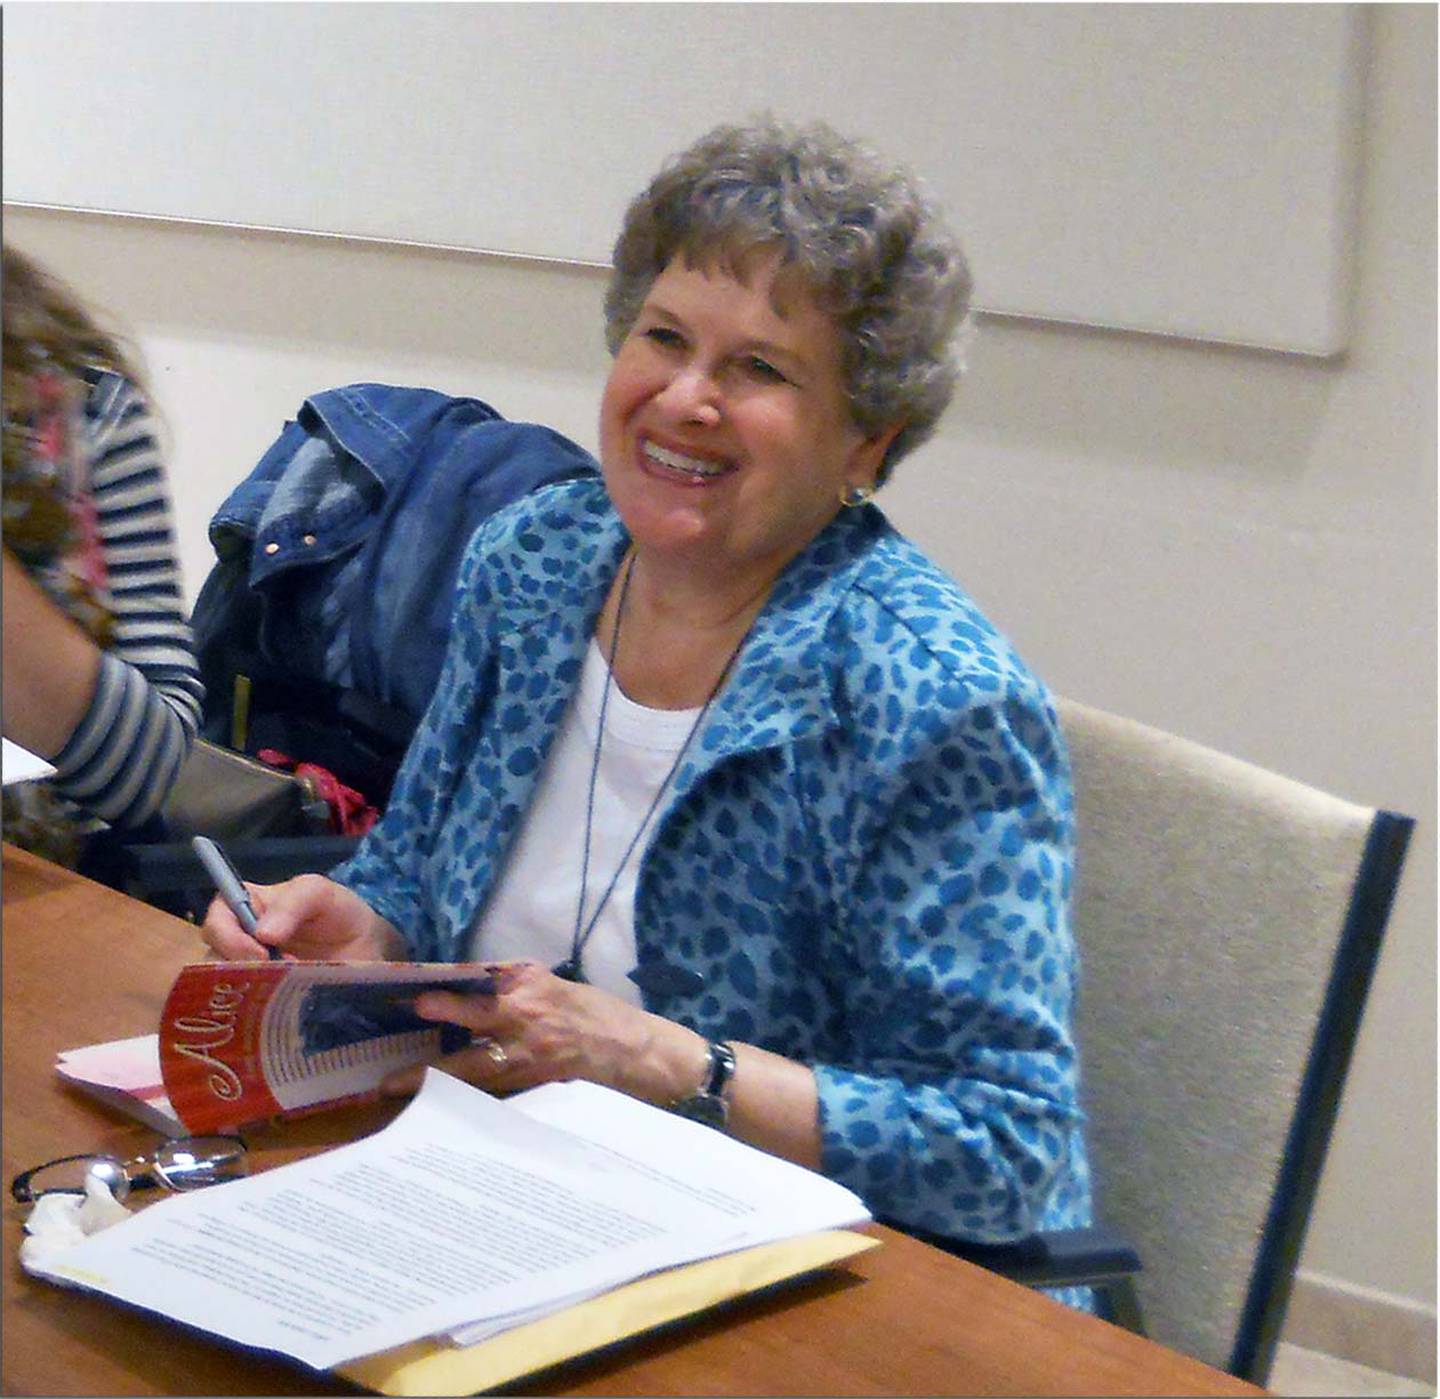 Award-winning author Phyllis Reynolds Naylor recently gave a $160,000 endowment to the Joliet Junior College Foundation. Naylor is a 1953 JJC alumna and long-time JJC donor. Naylor is seen in 2013 during her appearance at the Joliet Public Library's Black Road branch.